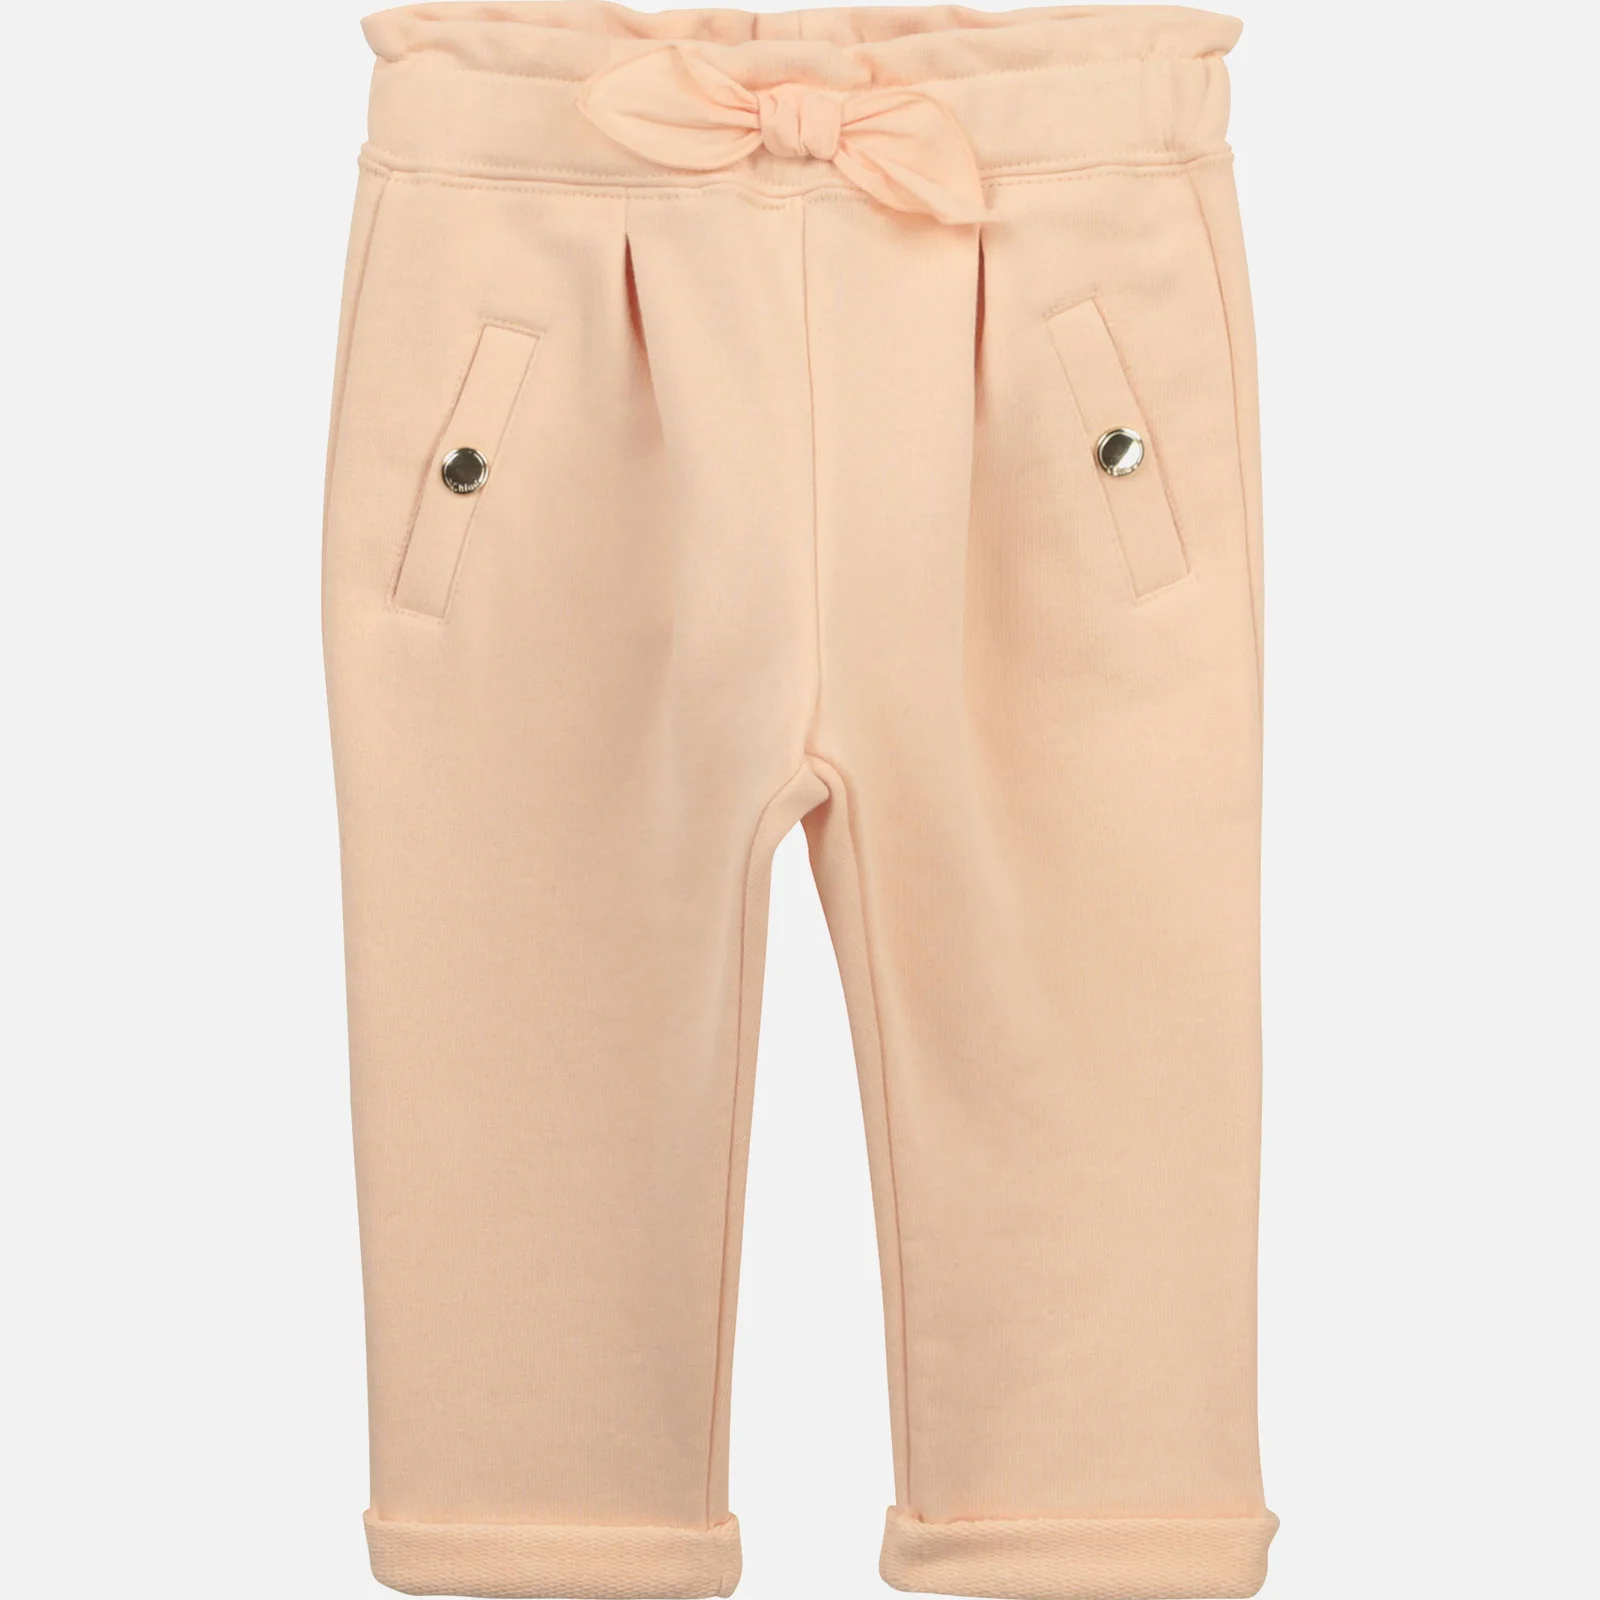 Chloe Girls' Toddlers Trousers - Pale Pink Image 1